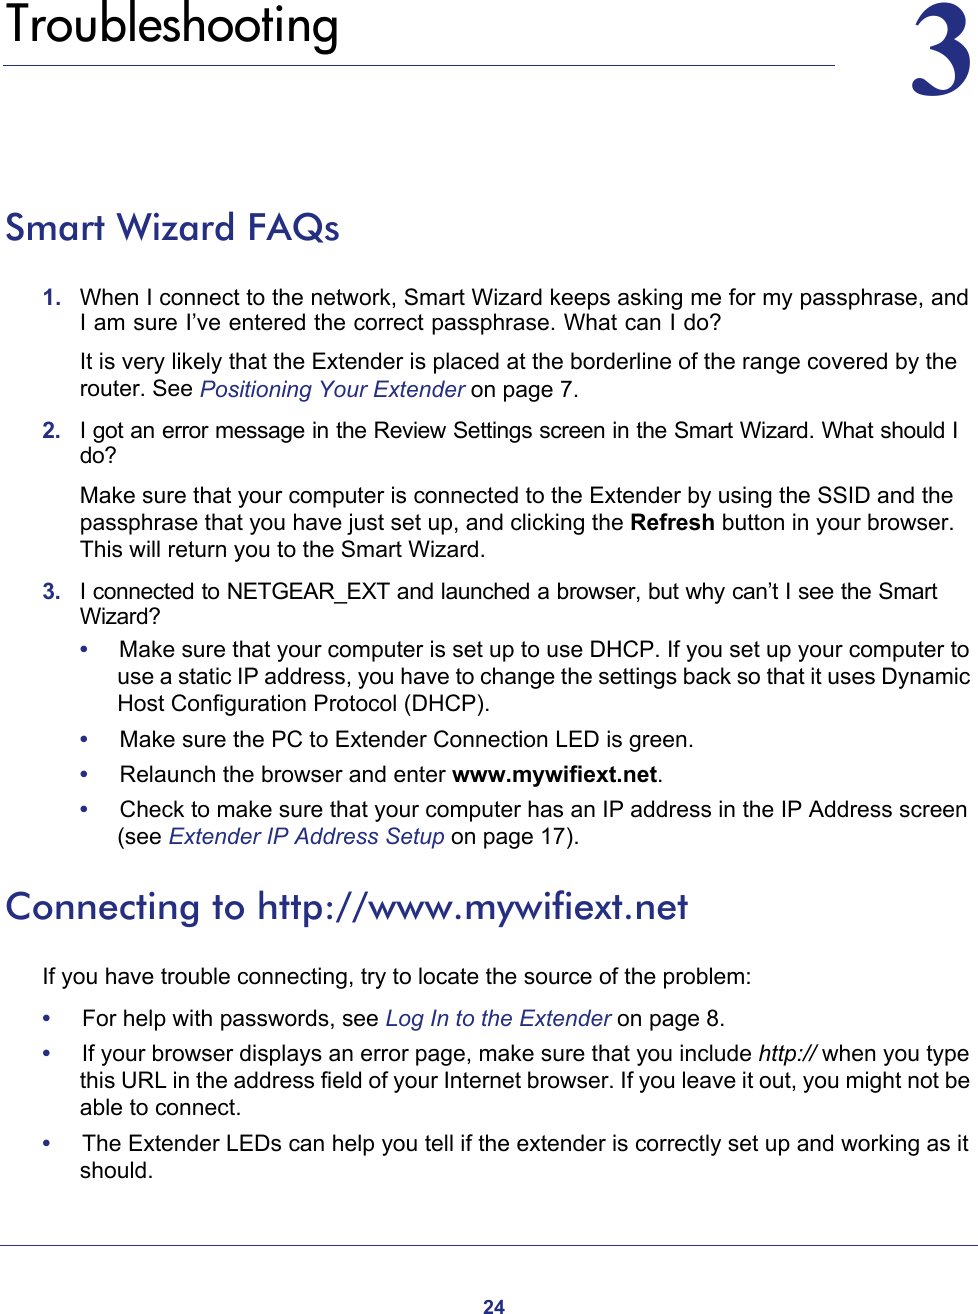 2433.   TroubleshootingSmart Wizard FAQs1.  When I connect to the network, Smart Wizard keeps asking me for my passphrase, and I am sure I’ve entered the correct passphrase. What can I do?It is very likely that the Extender is placed at the borderline of the range covered by the router. See Positioning Your Extender on page  7.2.  I got an error message in the Review Settings screen in the Smart Wizard. What should I do?Make sure that your computer is connected to the Extender by using the SSID and the passphrase that you have just set up, and clicking the Refresh button in your browser. This will return you to the Smart Wizard.3.  I connected to NETGEAR_EXT and launched a browser, but why can’t I see the Smart Wizard?•     Make sure that your computer is set up to use DHCP. If you set up your computer to use a static IP address, you have to change the settings back so that it uses Dynamic Host Configuration Protocol (DHCP). •     Make sure the PC to Extender Connection LED is green. •     Relaunch the browser and enter www.mywifiext.net. •     Check to make sure that your computer has an IP address in the IP Address screen (see Extender IP Address Setup on page  17).Connecting to http://www.mywifiext.netIf you have trouble connecting, try to locate the source of the problem:•     For help with passwords, see Log In to the Extender on page  8.•     If your browser displays an error page, make sure that you include http:// when you type this URL in the address field of your Internet browser. If you leave it out, you might not be able to connect.•     The Extender LEDs can help you tell if the extender is correctly set up and working as it should.